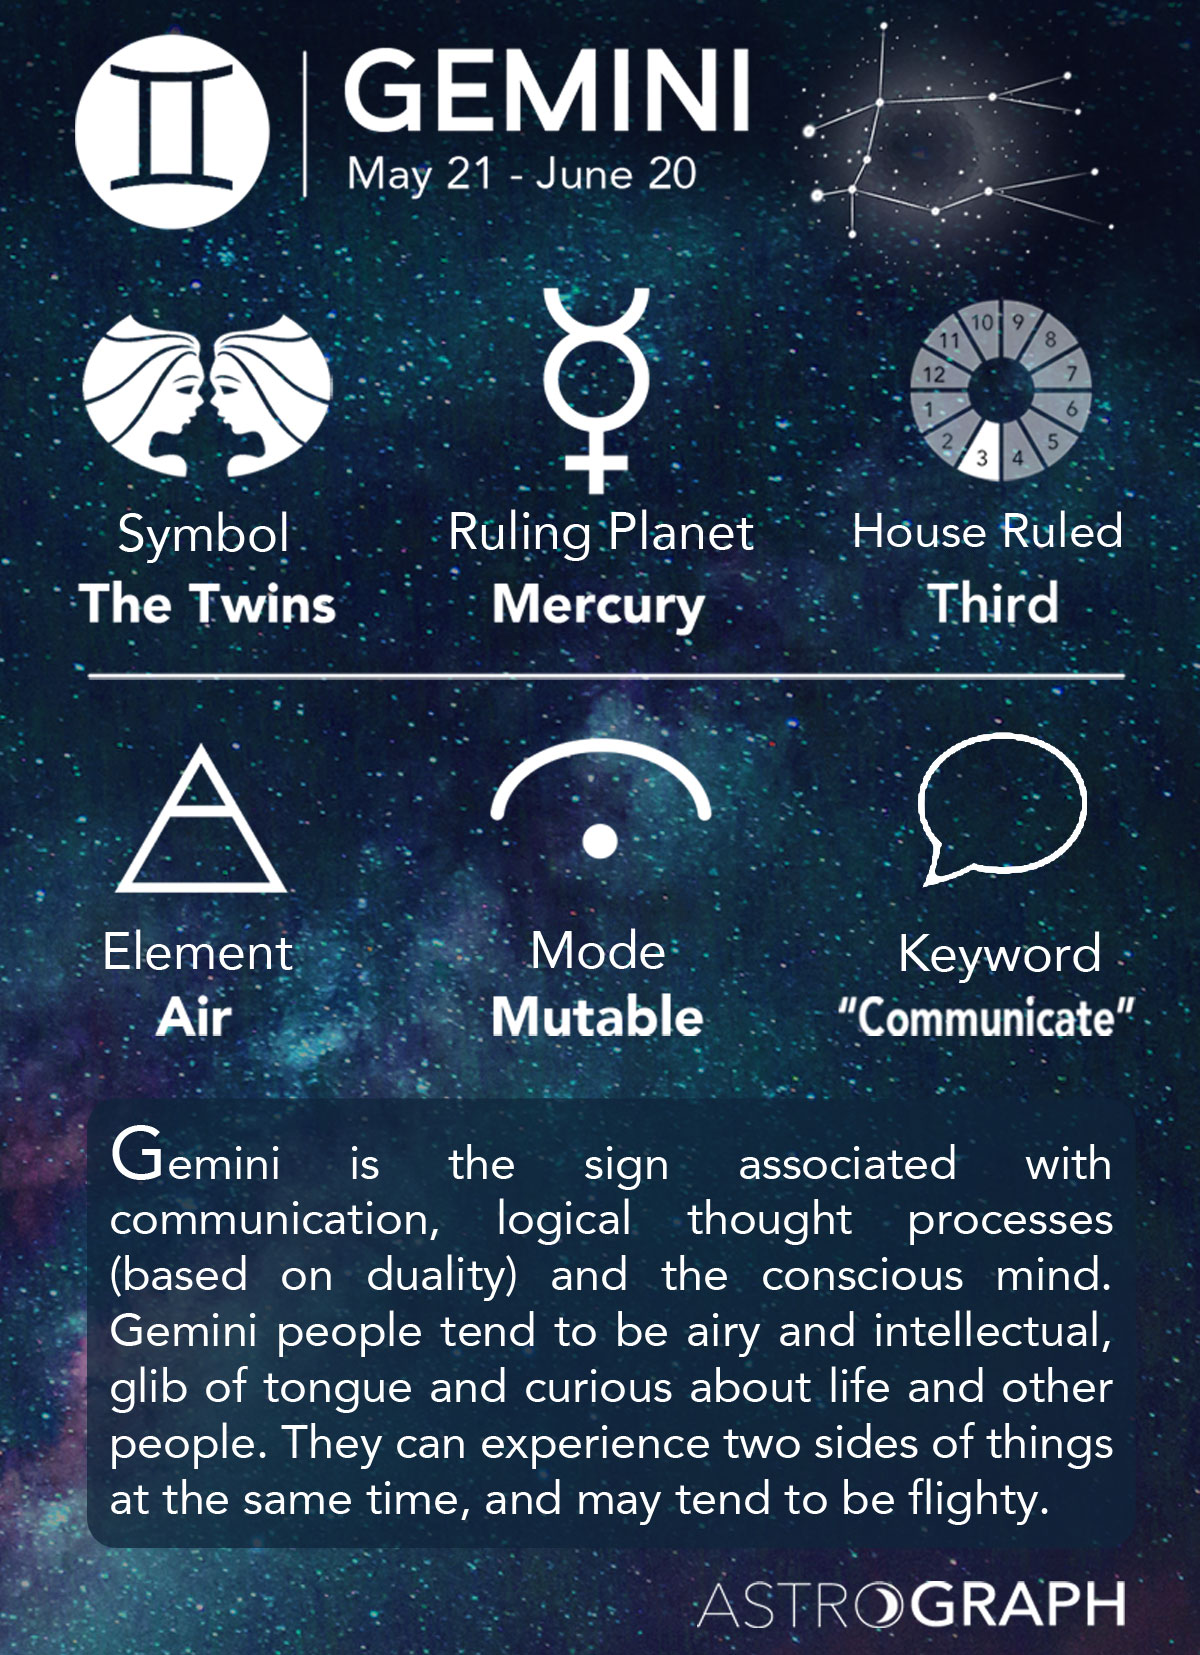 What Is The Ruling Planet For A Gemini?